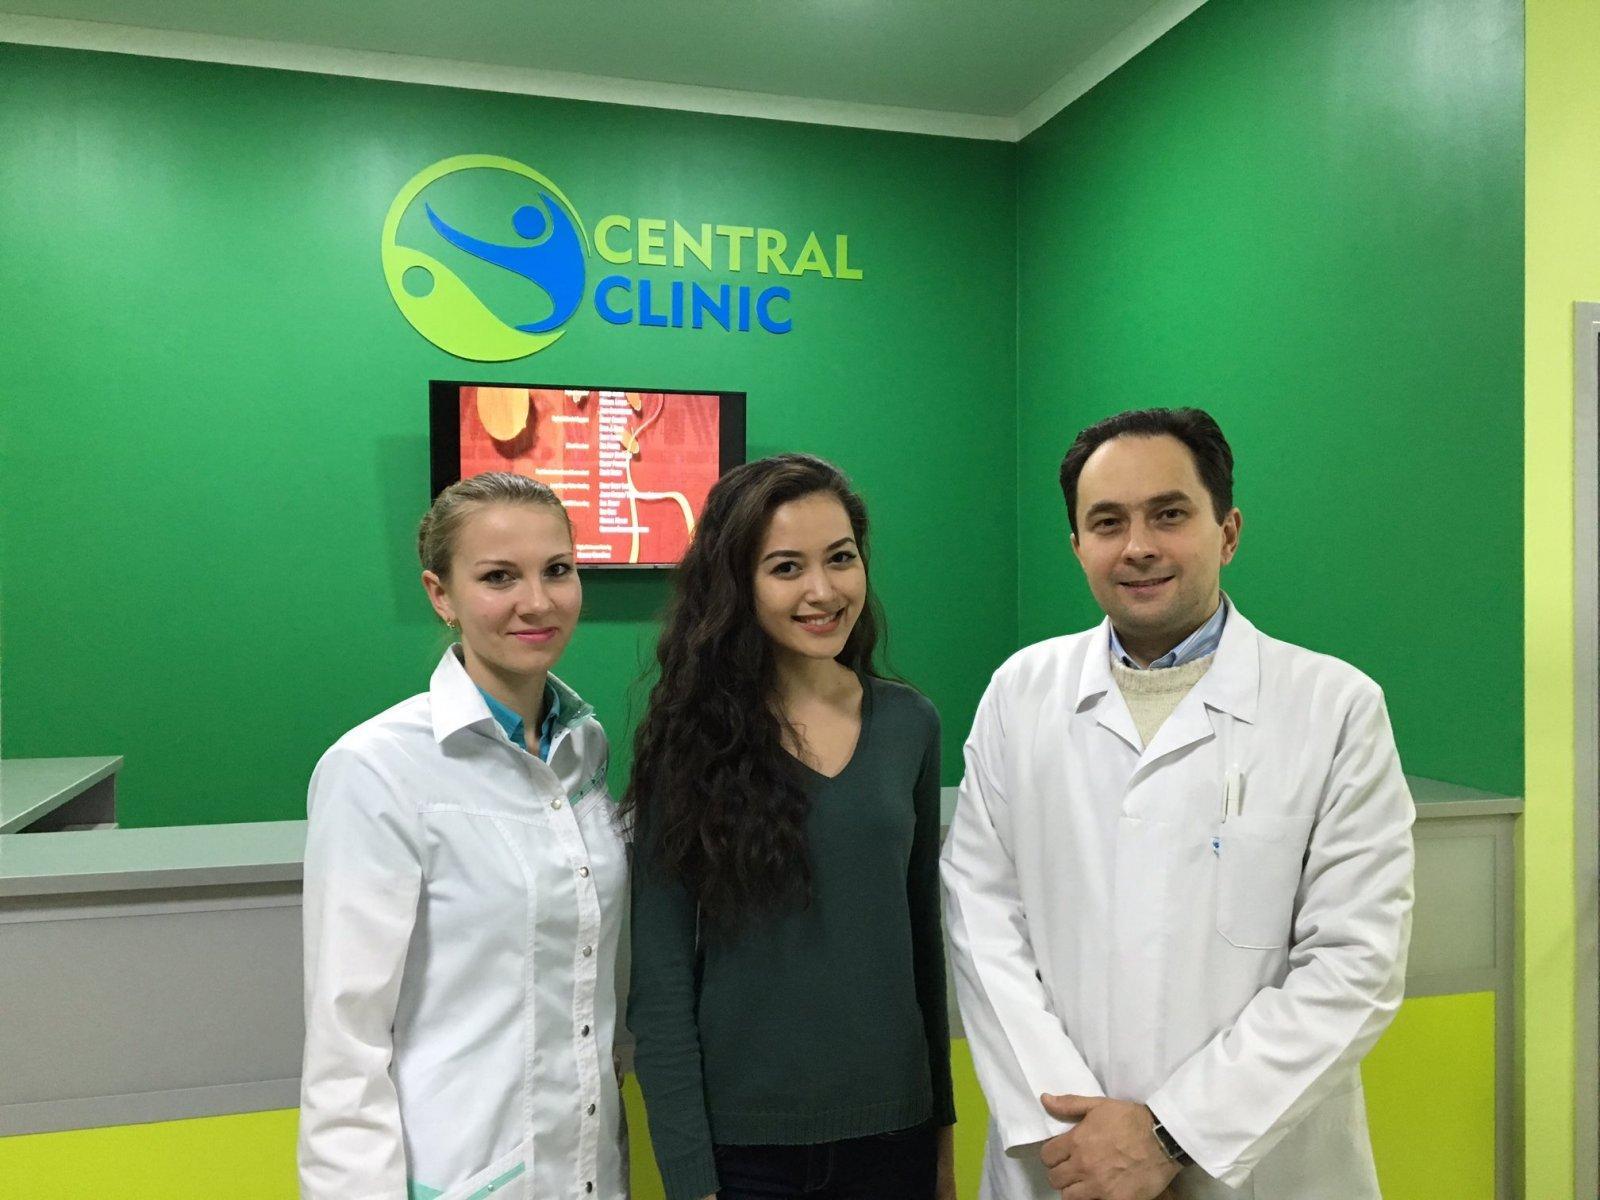 Central clinic. Централ клиник. Директор клиники Central Clinic. Uni Clinic Астана. Novolife Clinic Астана.